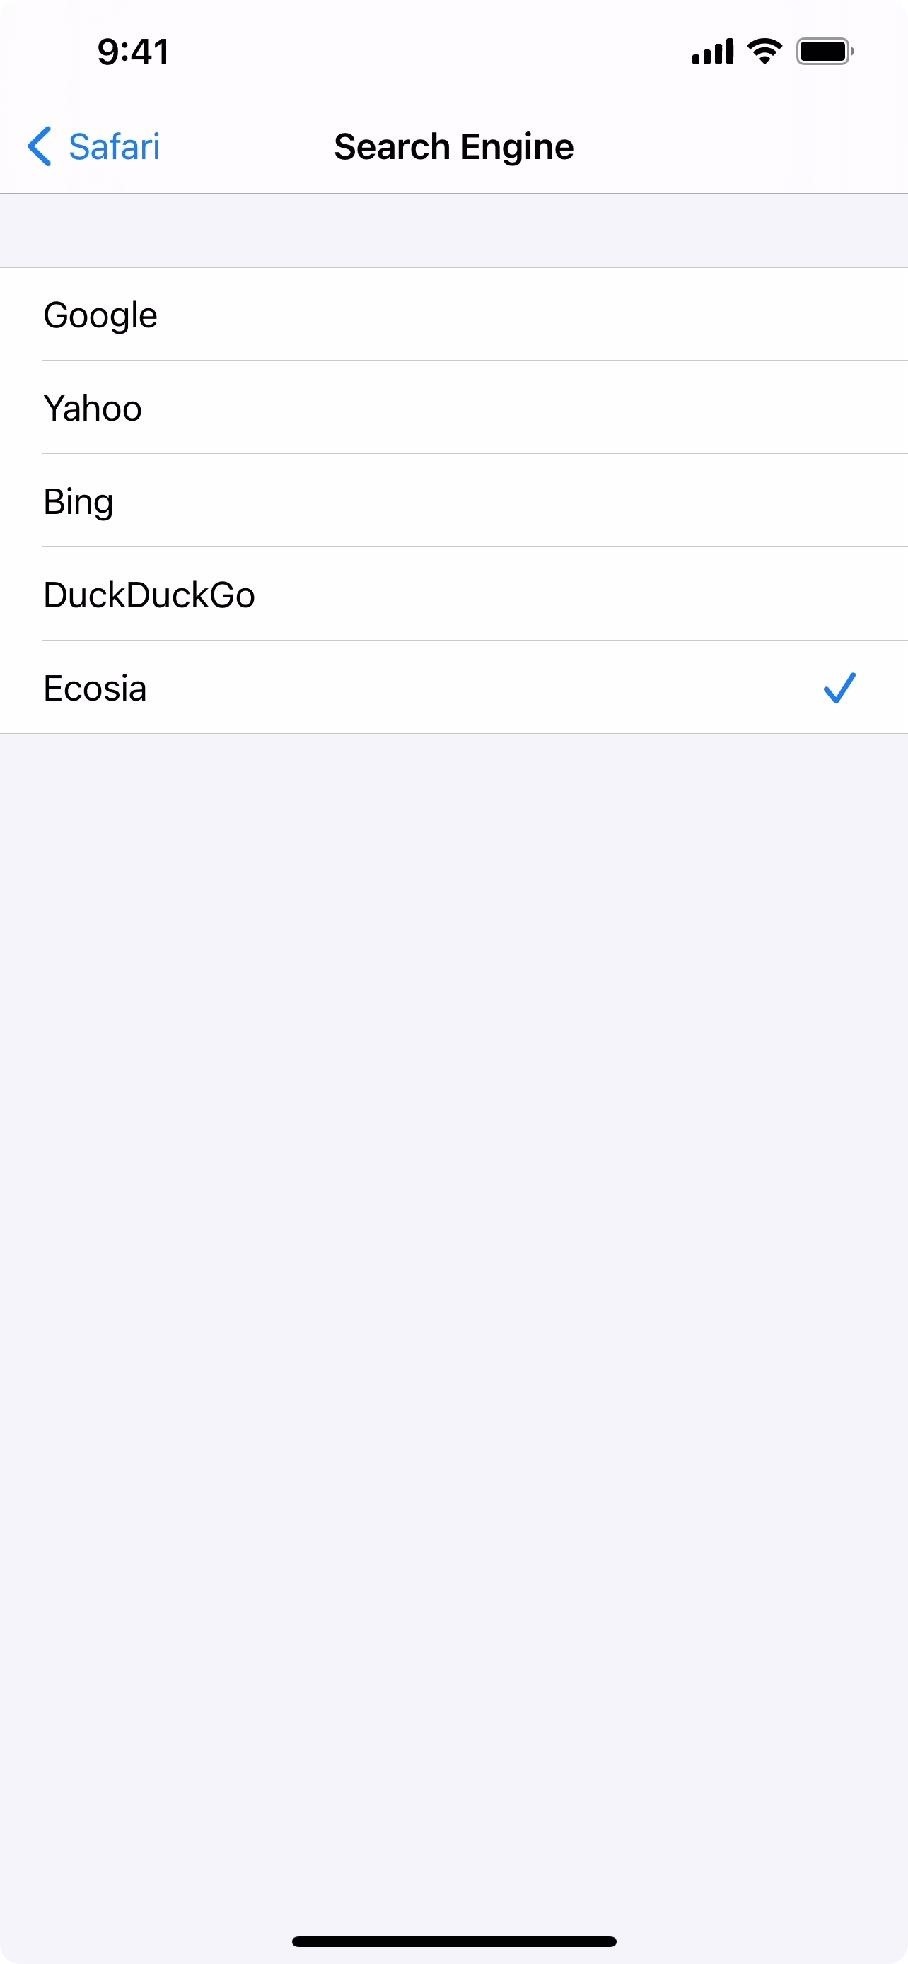 How to Set Ecosia as Your iPhone's Default Search Engine or Web Browser (And Why You Should)